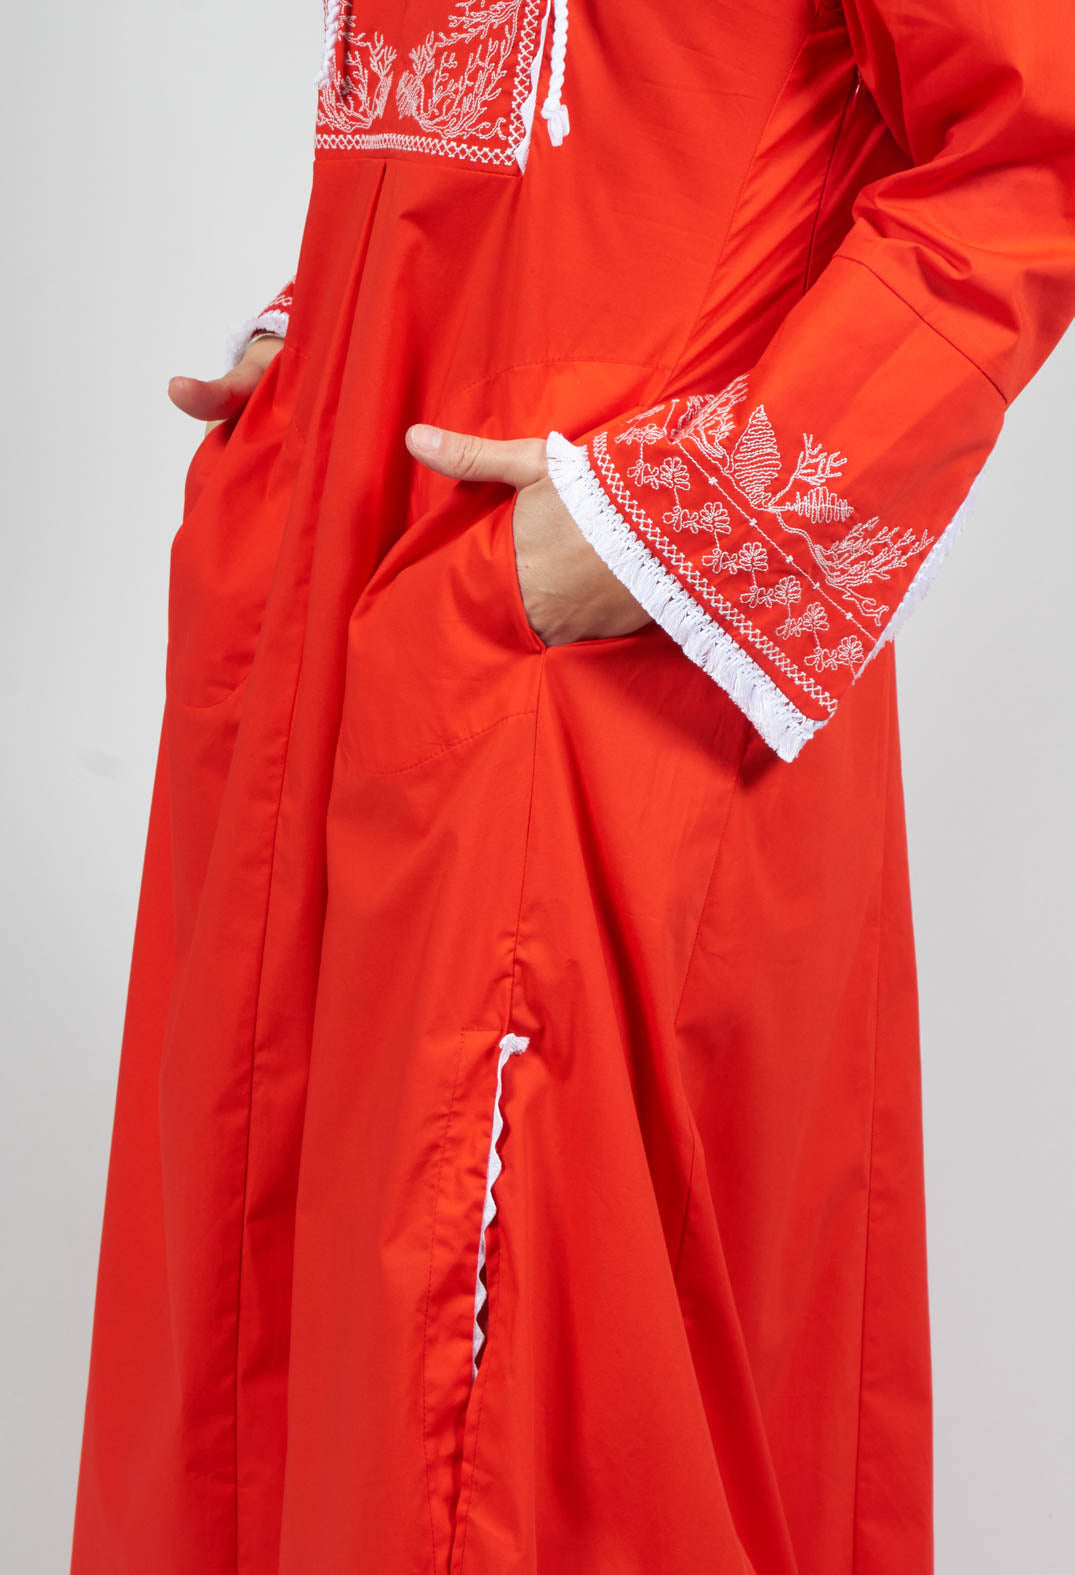 red long sleeve dress with embroidery and front pockets